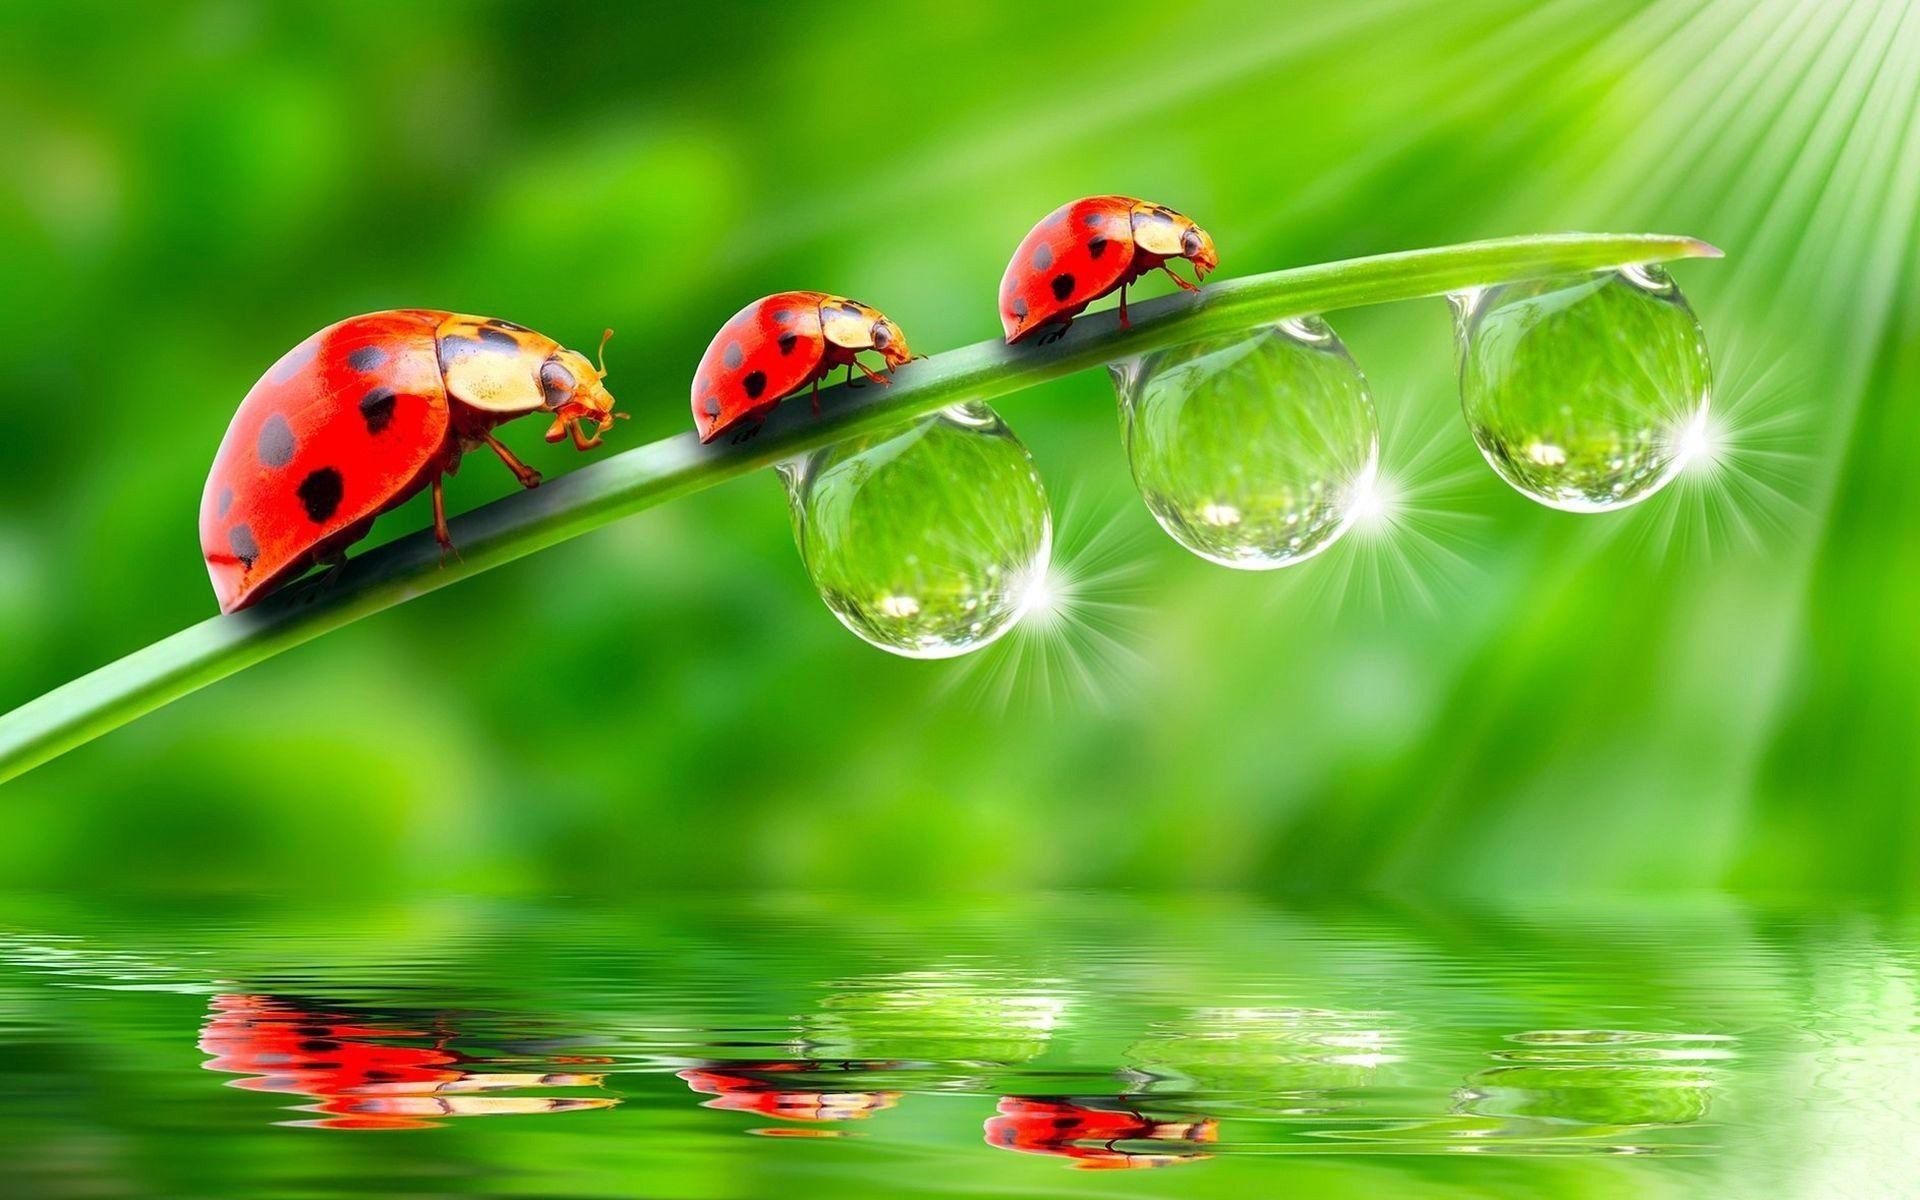 1920x1200 Water Drops HD Wallpaper | Water Drops Images and Pictures | Cool .